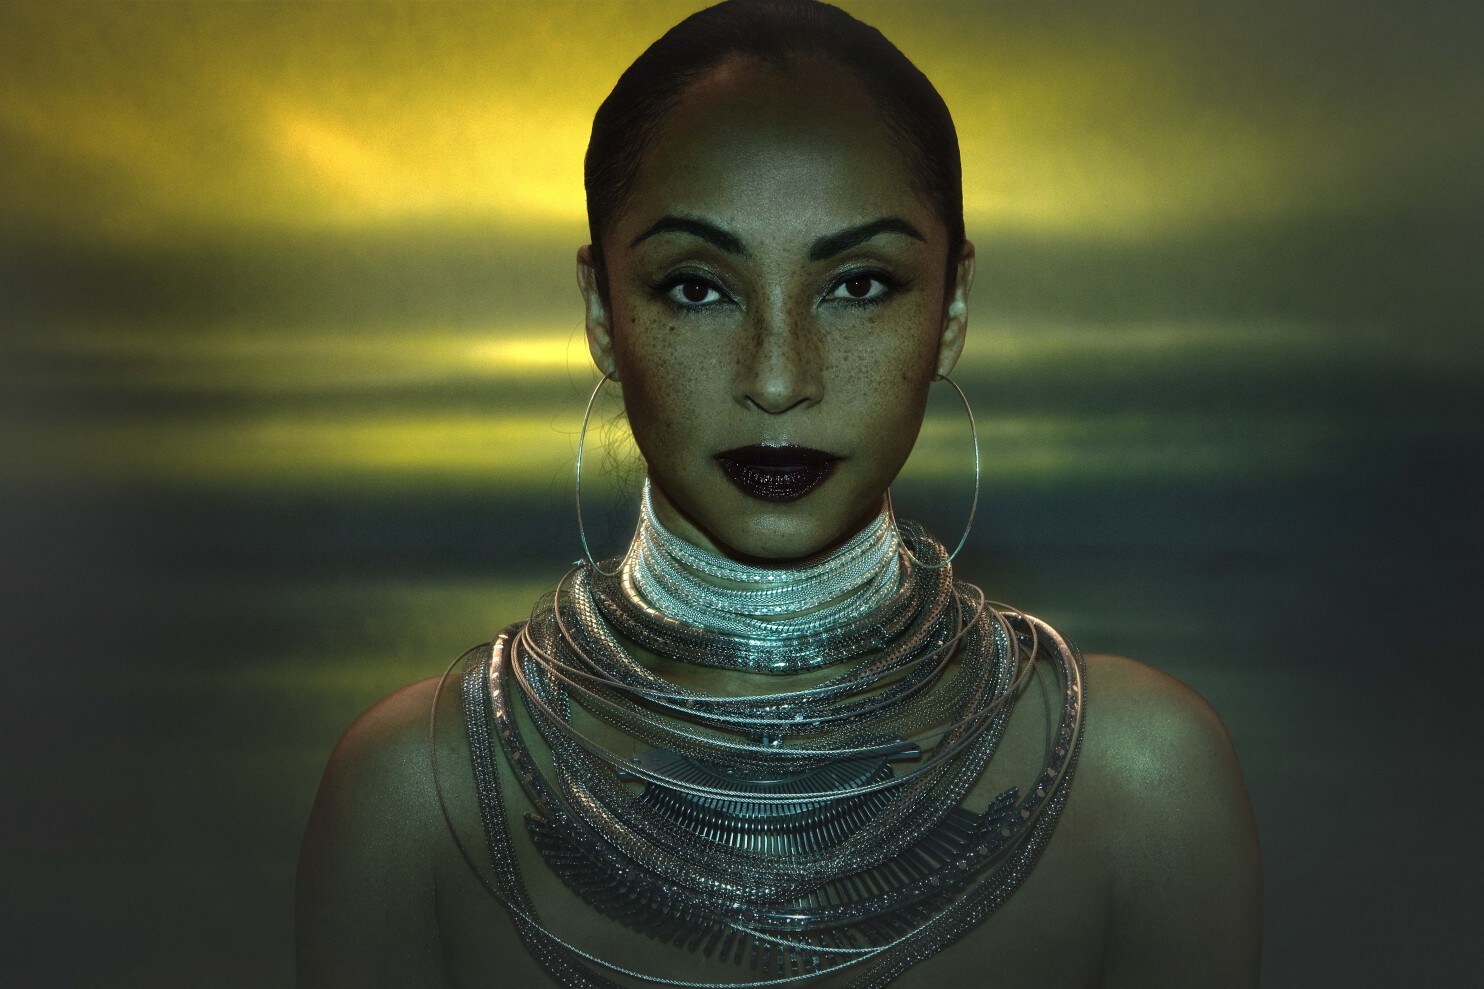 sade by your side song about son?